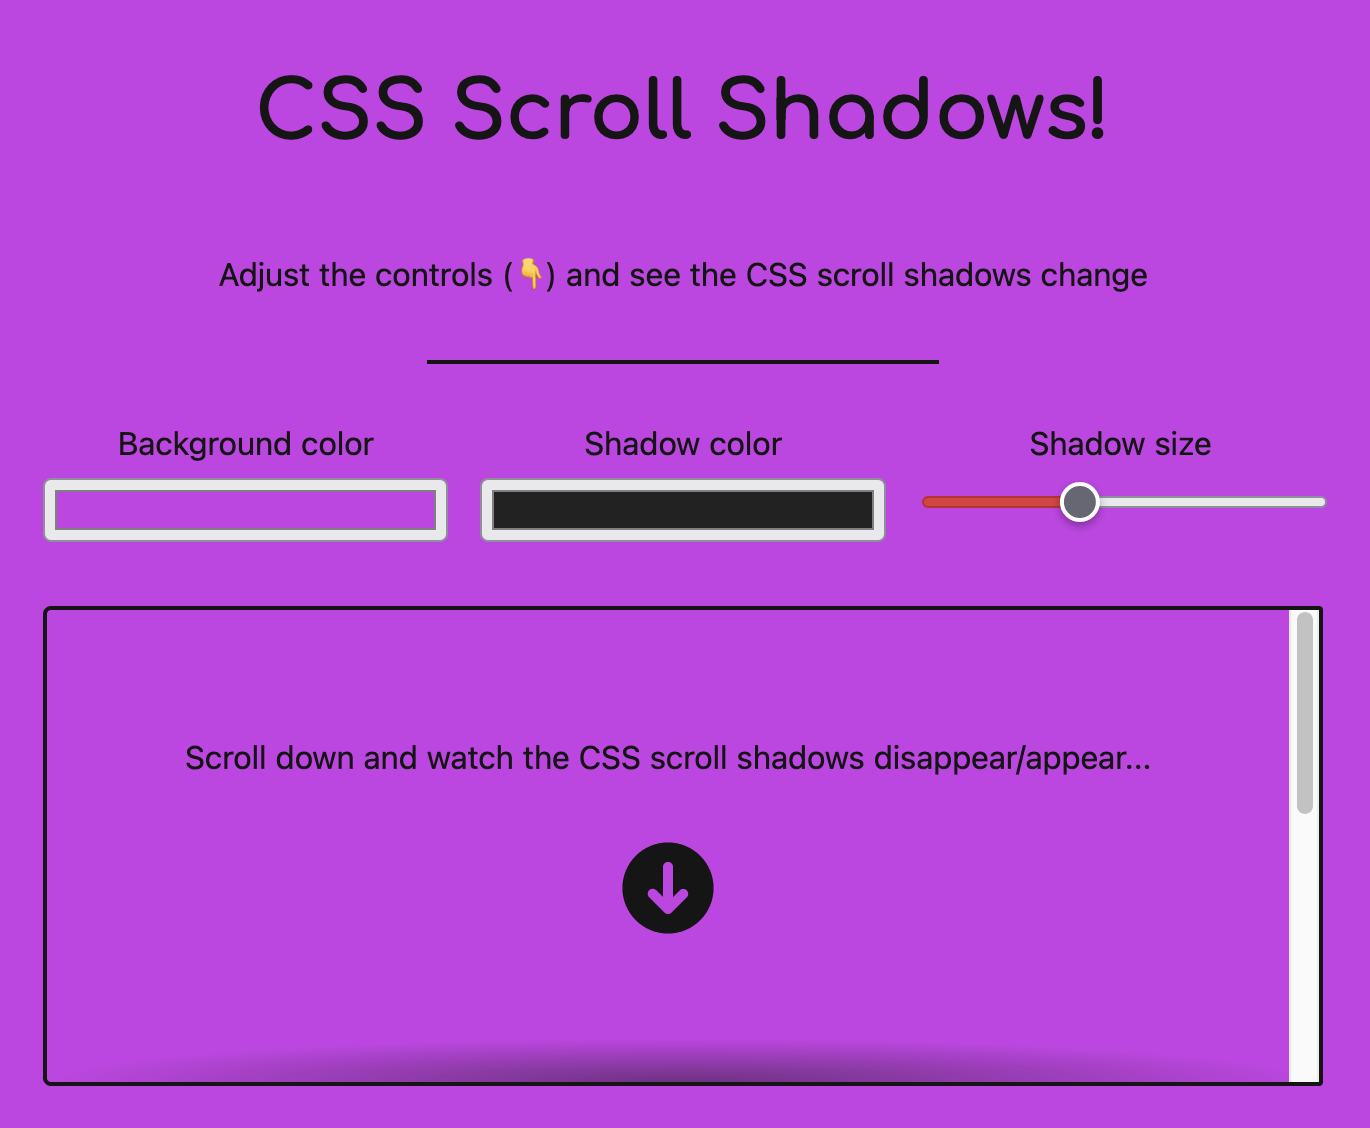 CSS Scroll shadows interface to choose colors and shadow size.